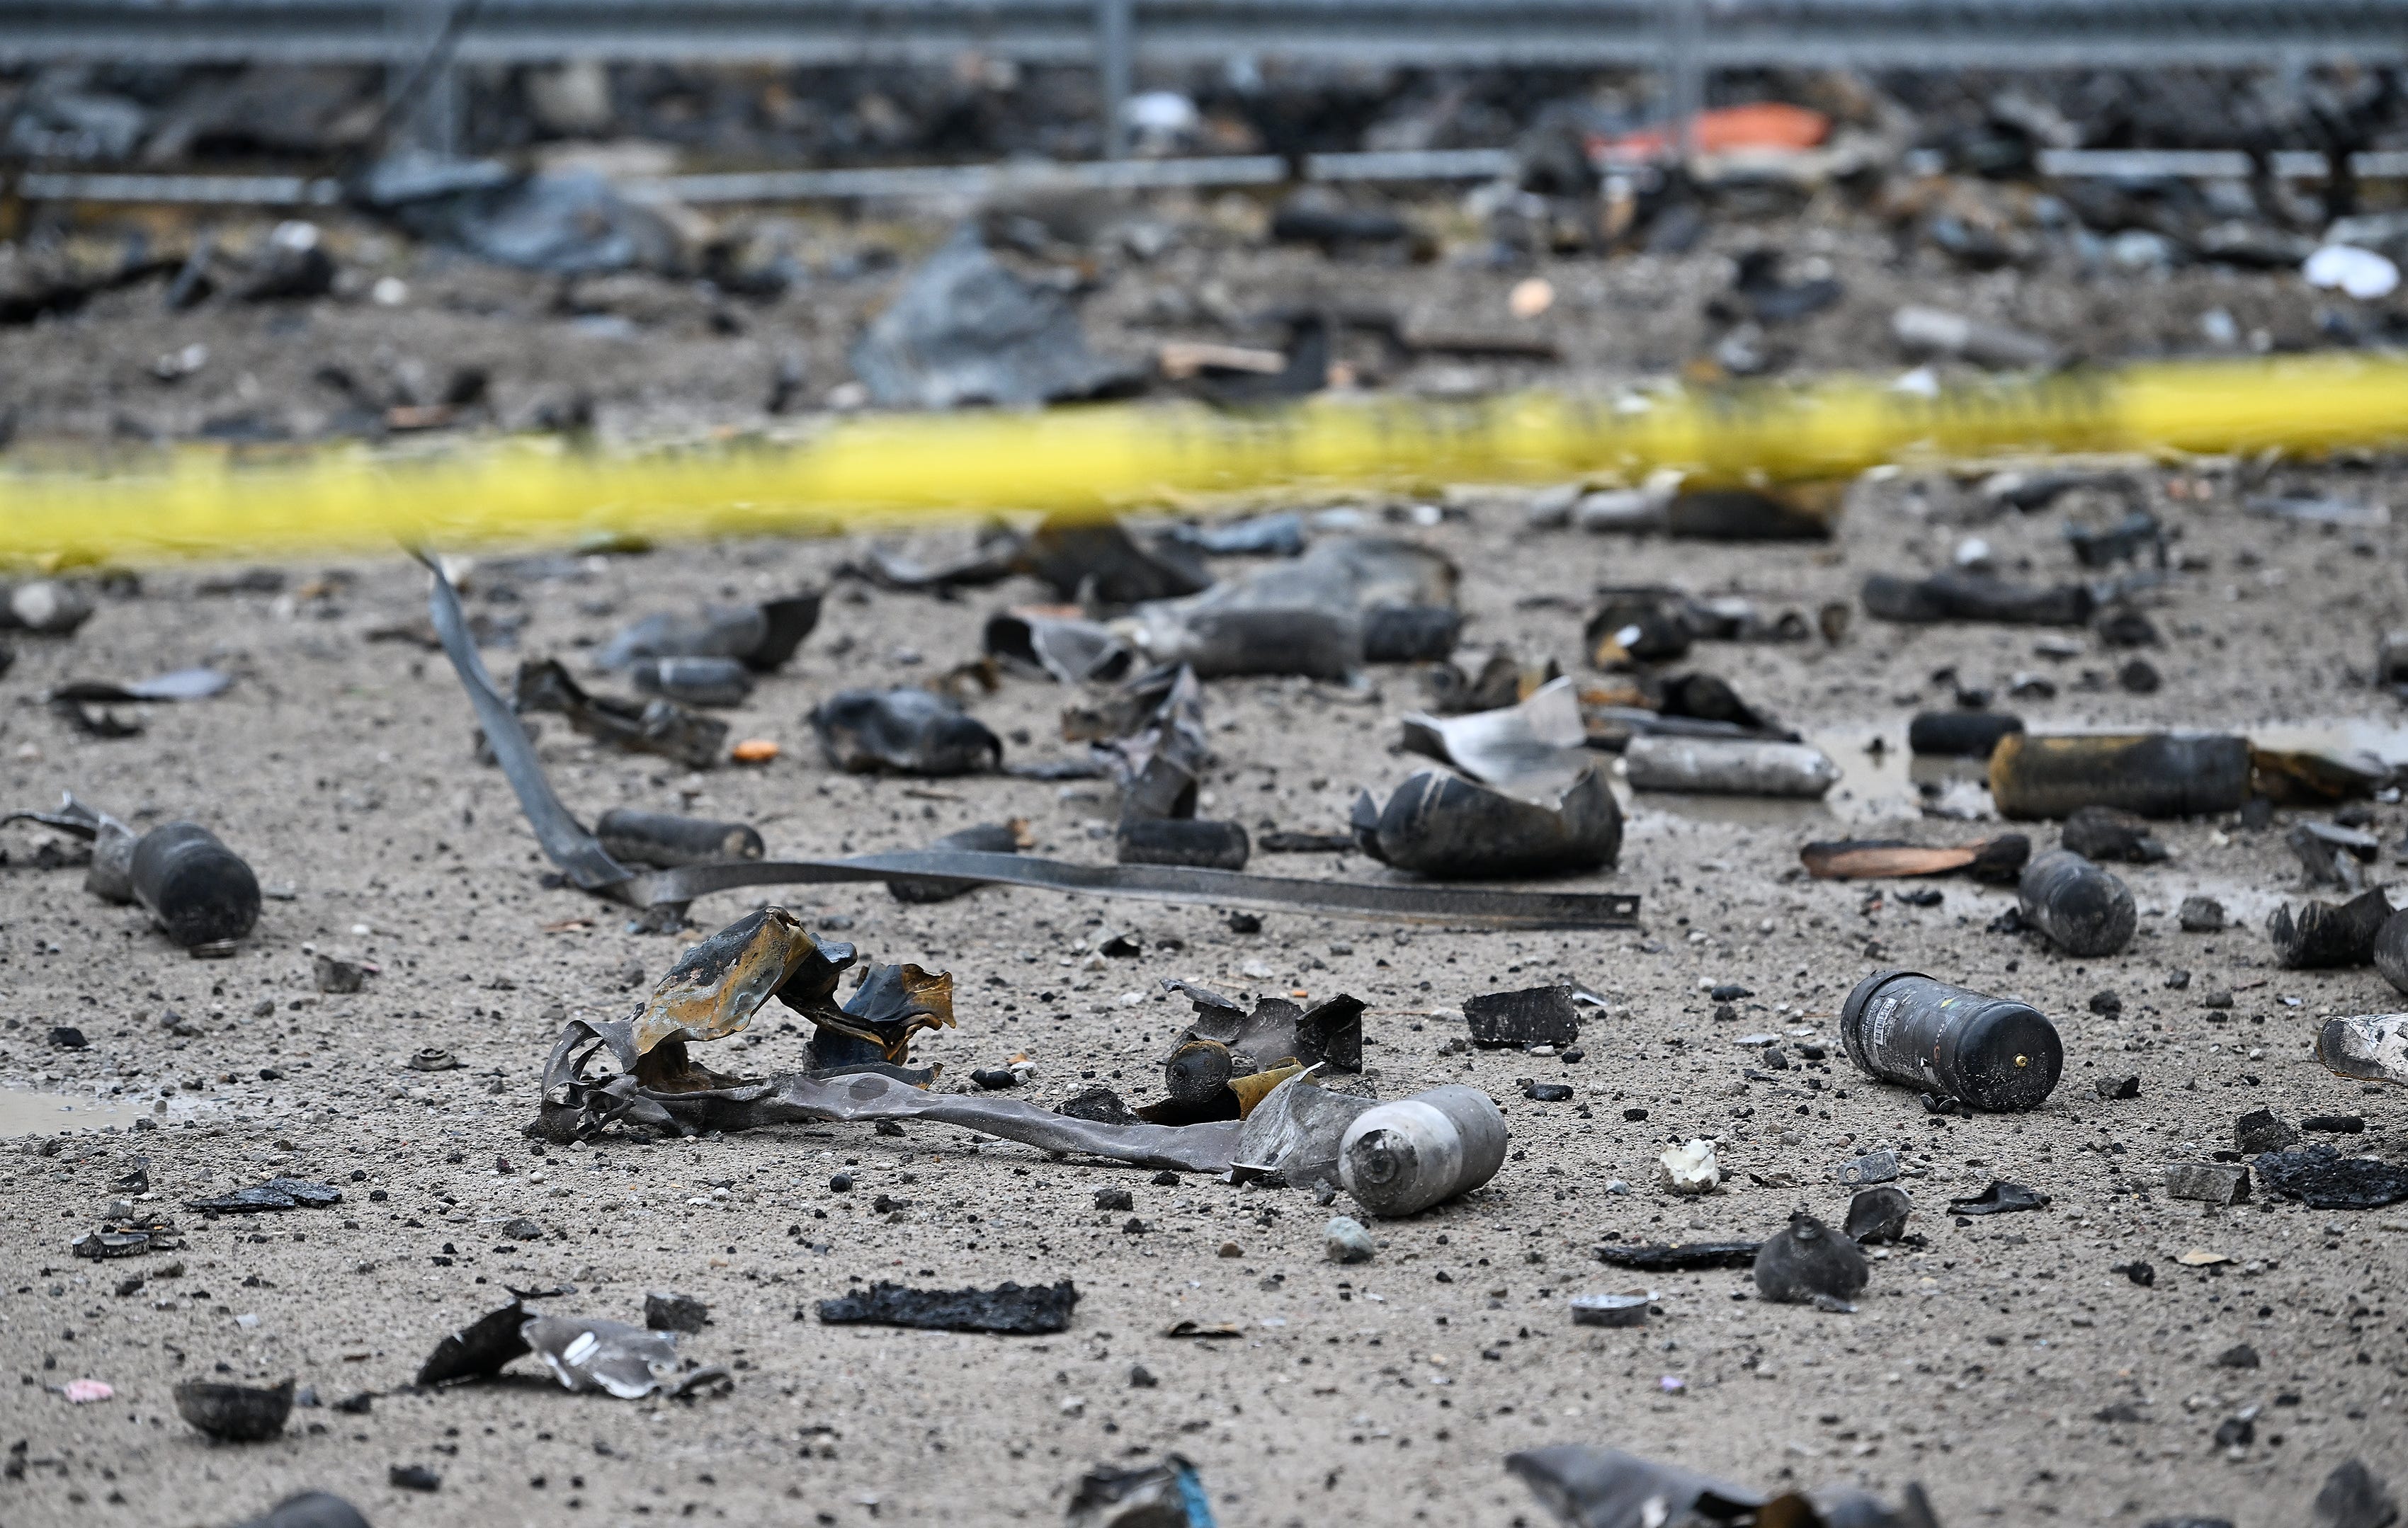 Debris, including canisters and knives to name two items, strewn around the area near Select Distributors and Goo LLC in Clinton Township, Mich. on Mar. 5, 2024. Select Distributors was the scene of fire and explosions the night before on March 4, 2024.